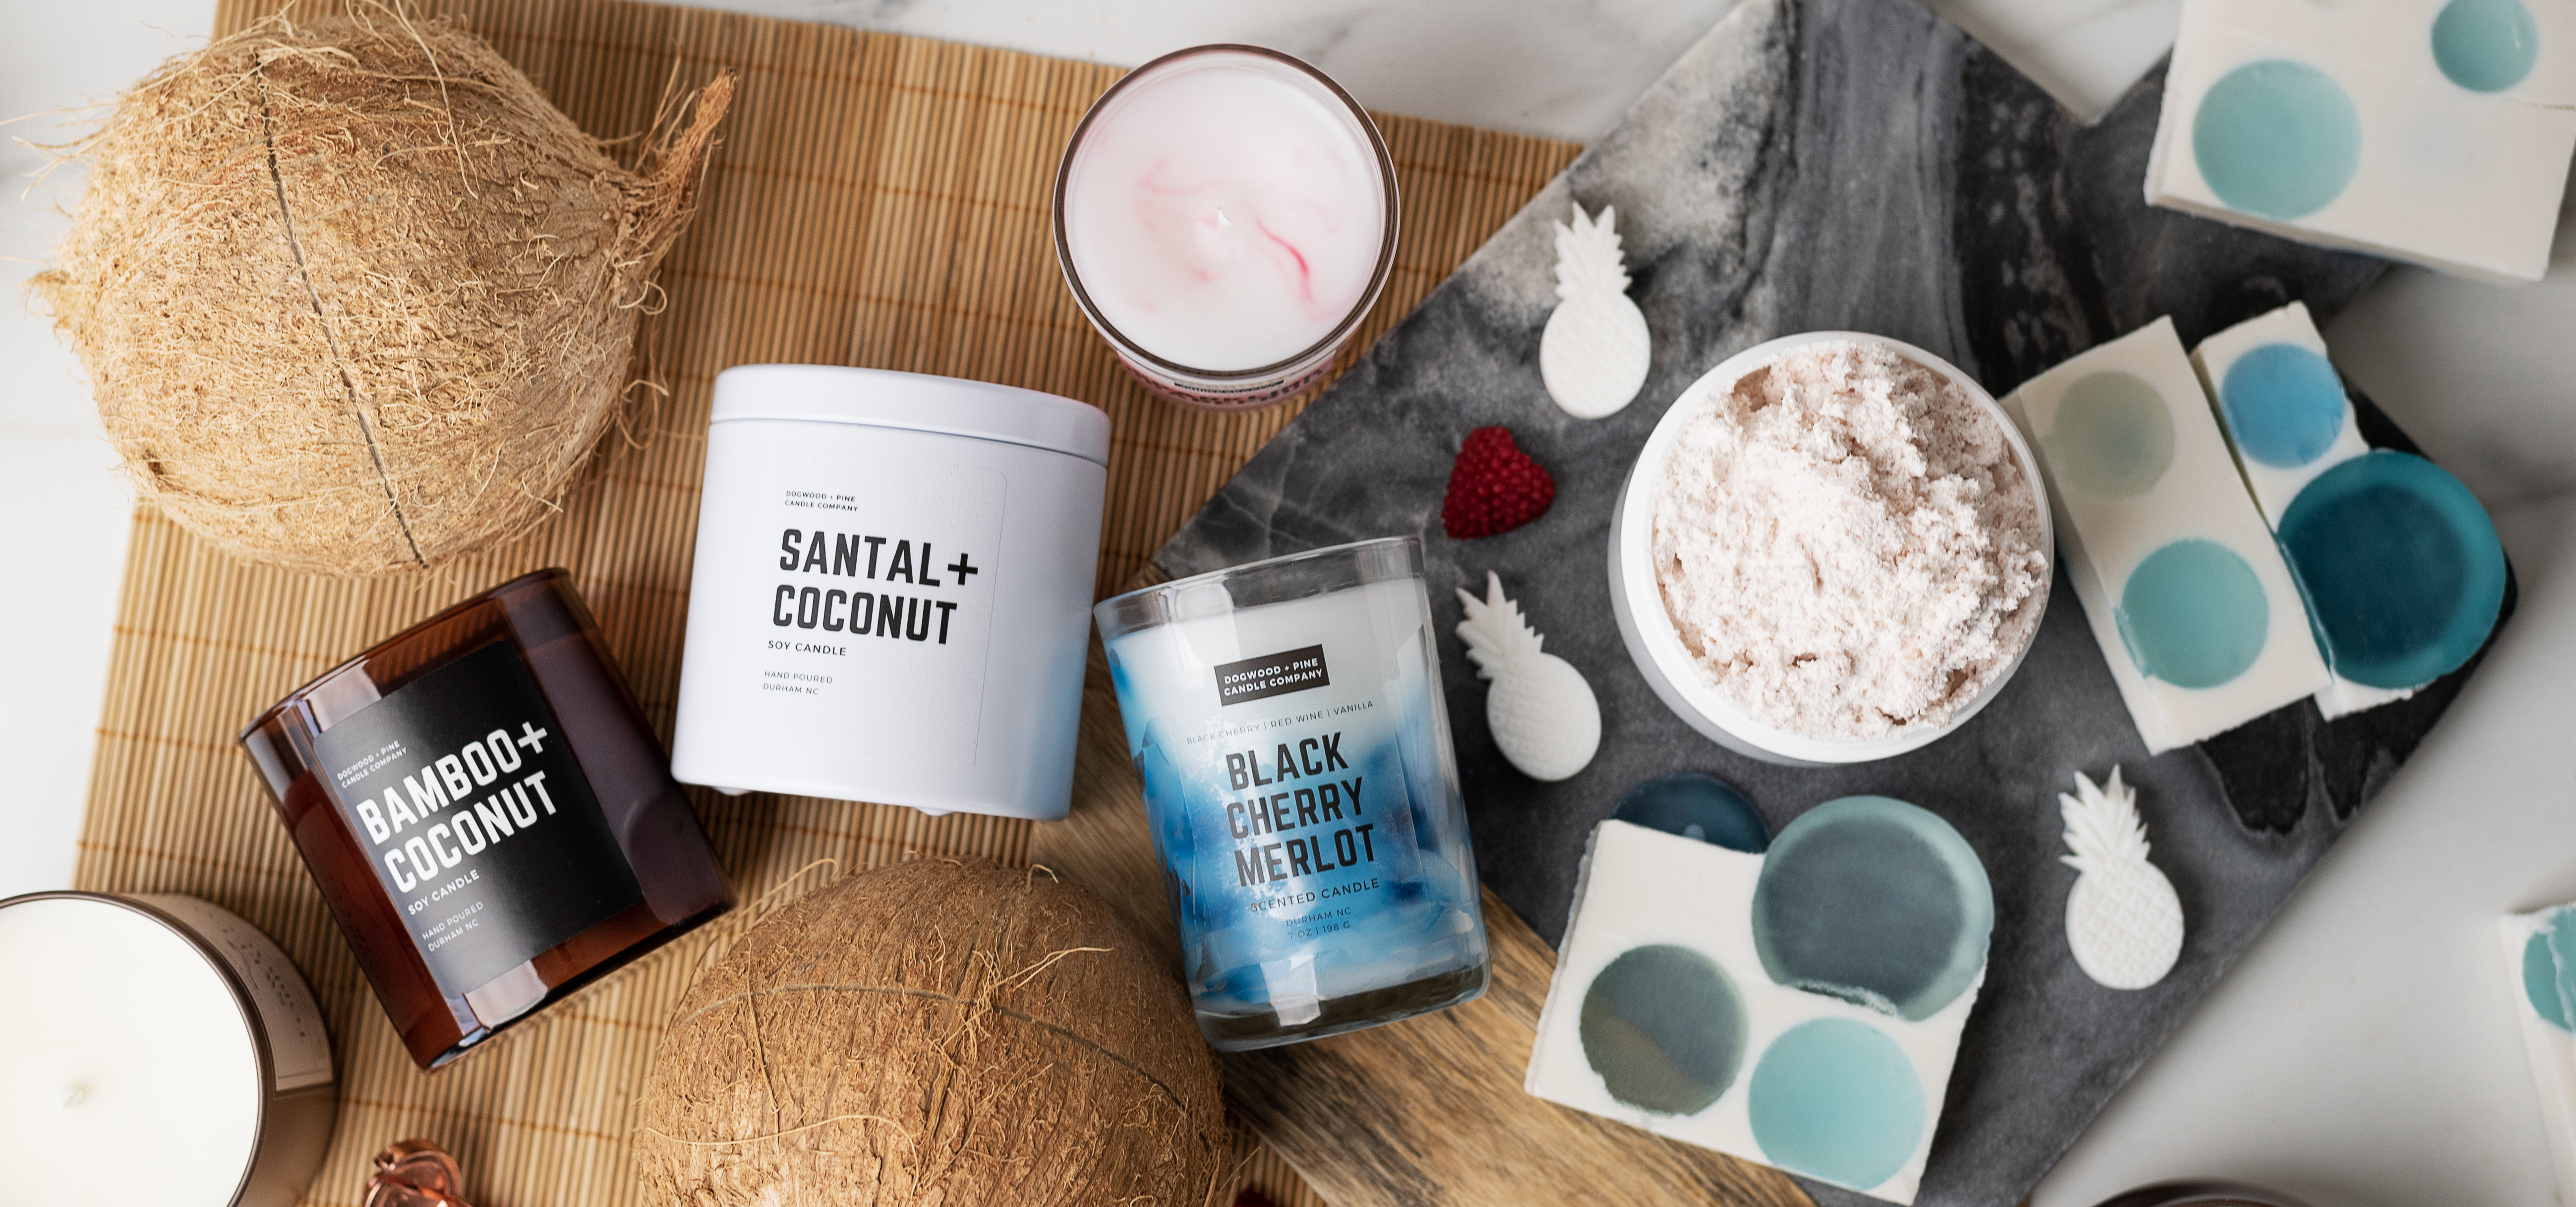 Summer Season Inspiration: Bath and Body, Candles, and More - CandleScience